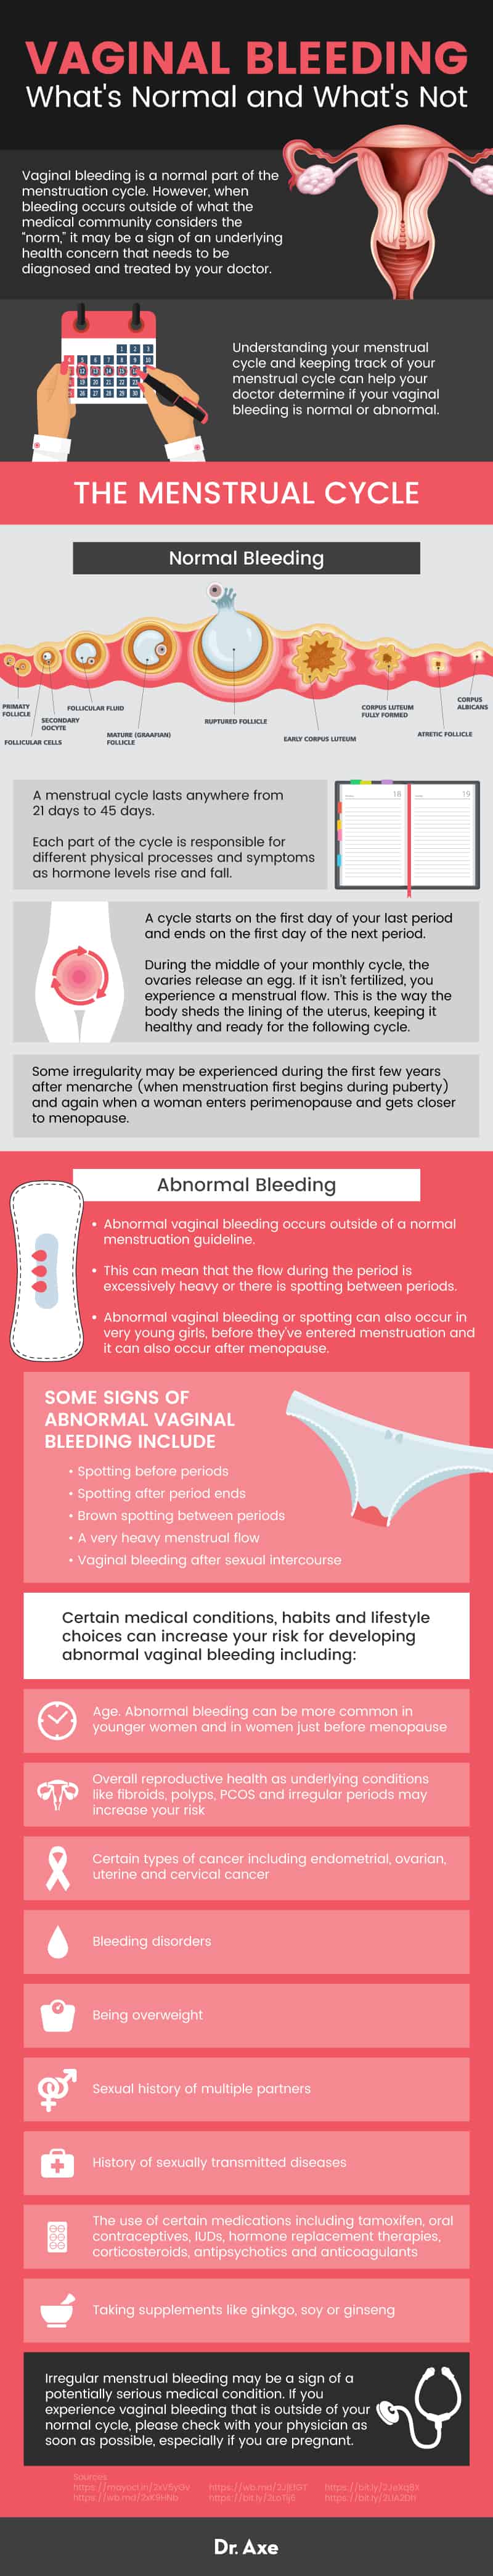 Vaginal bleeding: what's normal and what's not - Dr. Axe